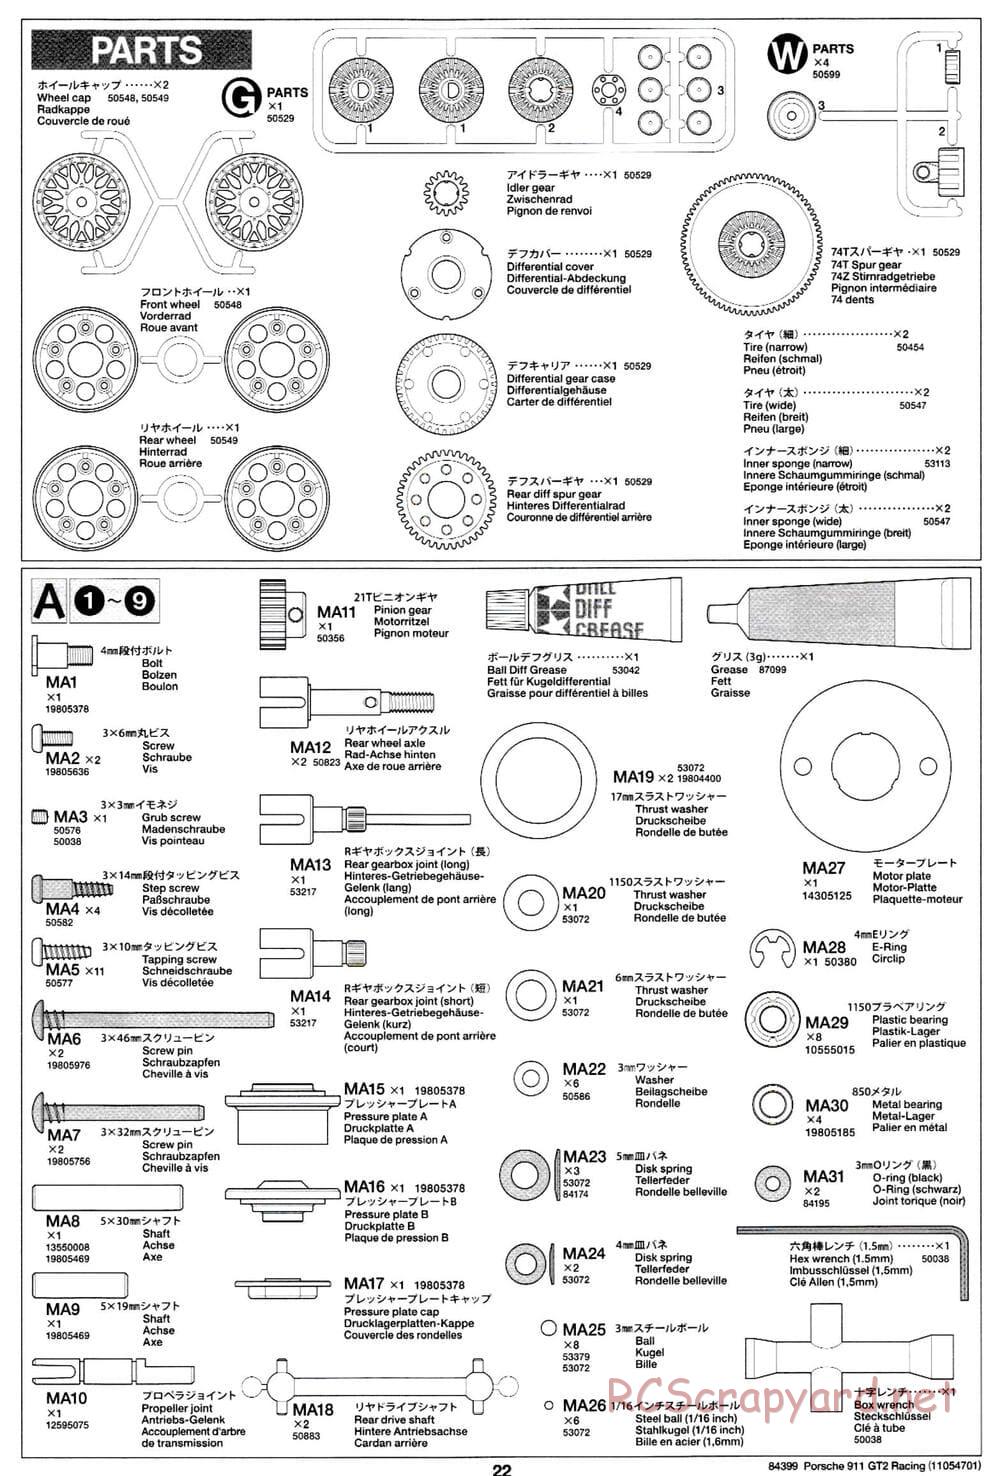 Tamiya - Porsche 911 GT2 Racing - TA02SW Chassis - Manual - Page 22